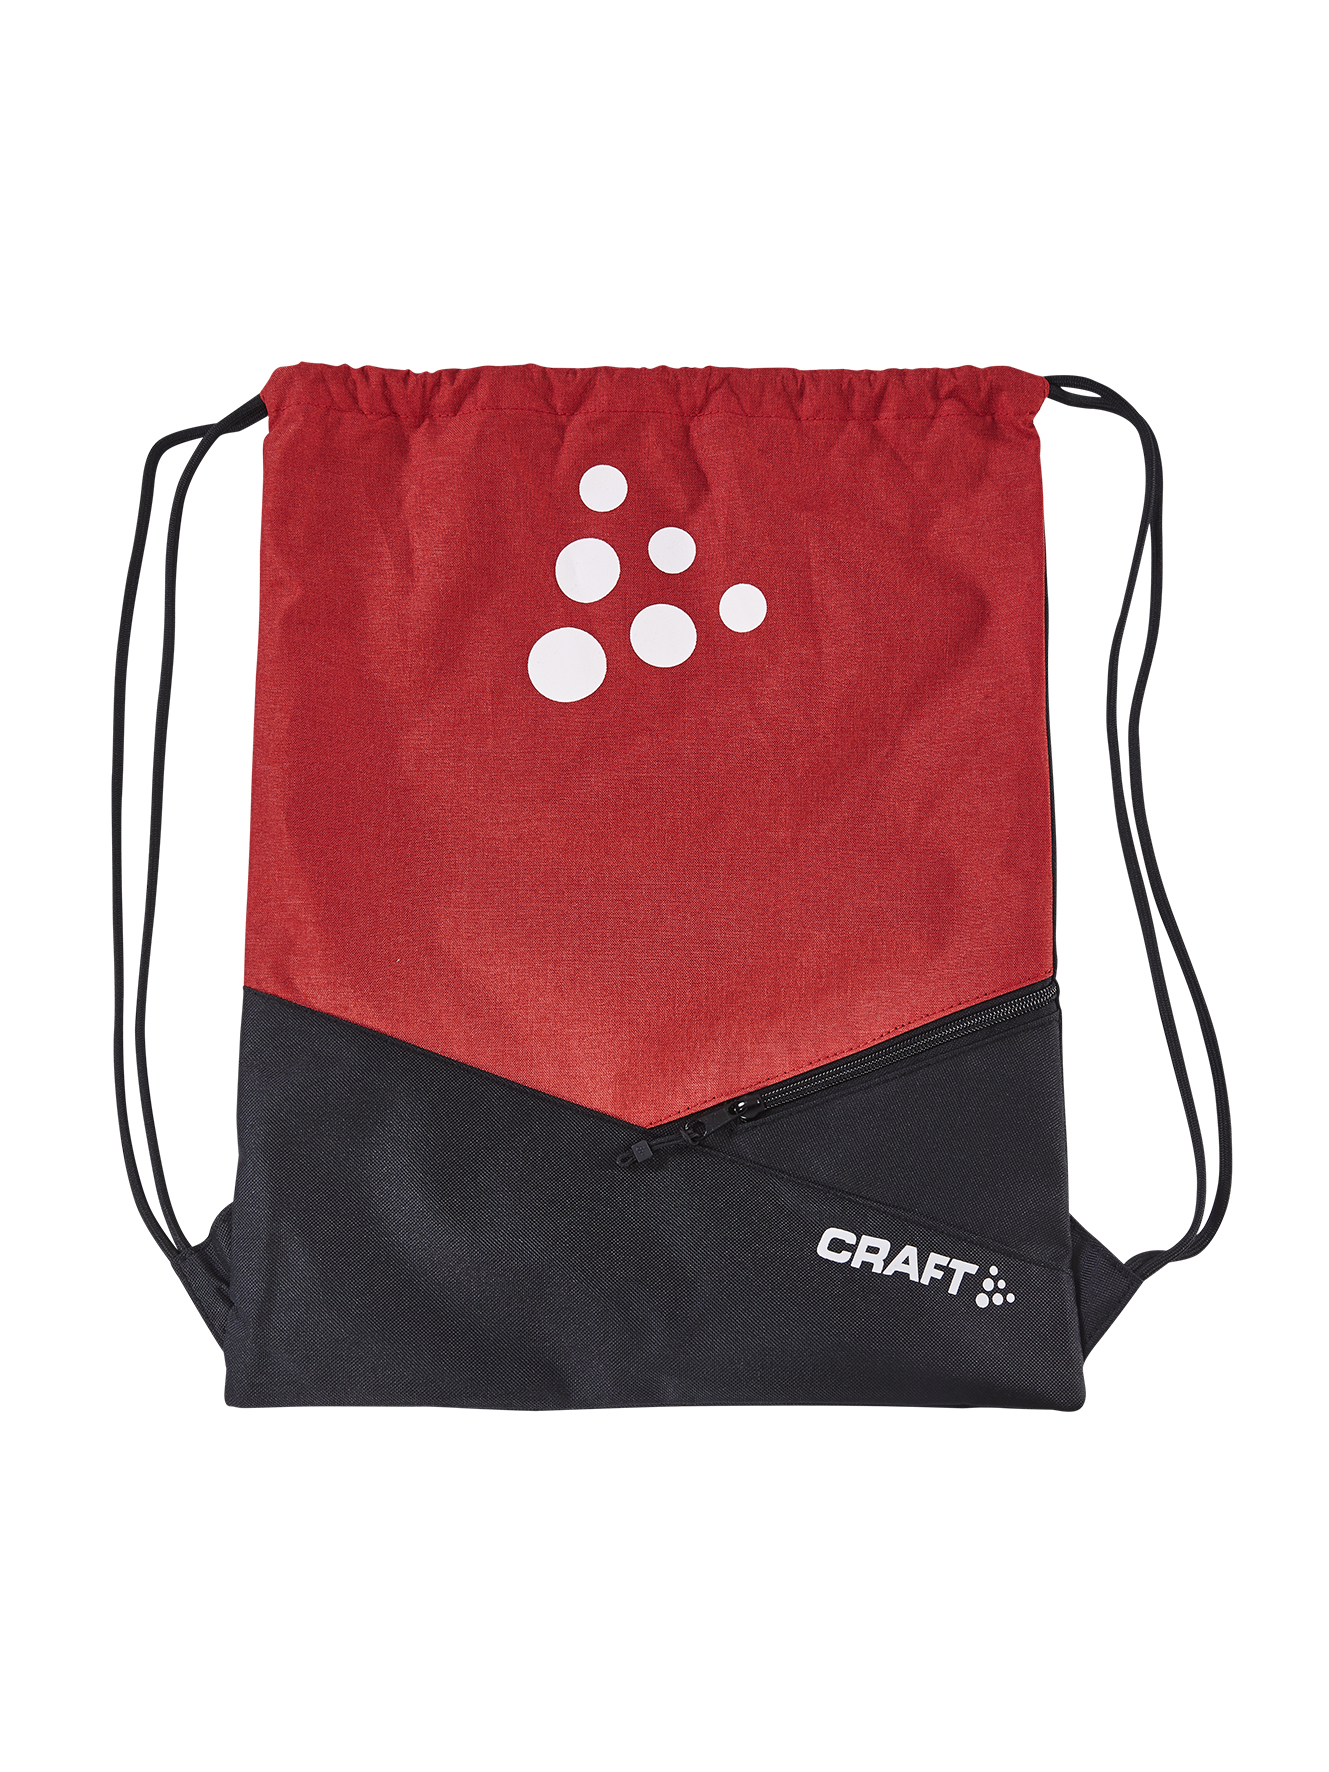 CRAFT_1905598_9430_SQUAD_Gymbag_black_bright_red